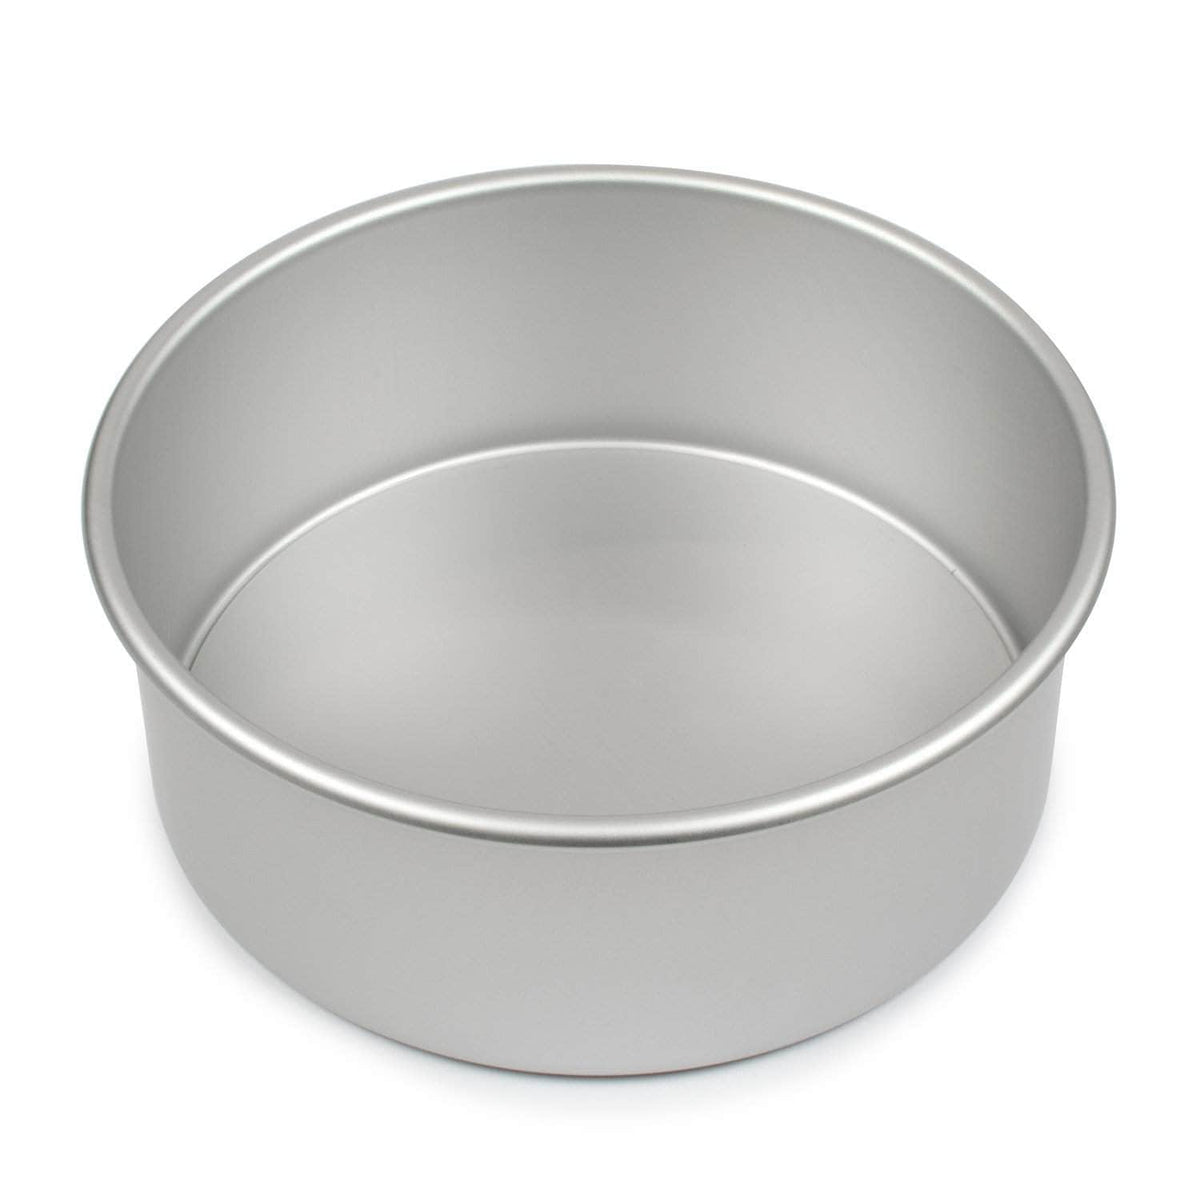 *New* Silver anodised deep cake tin 9 inches